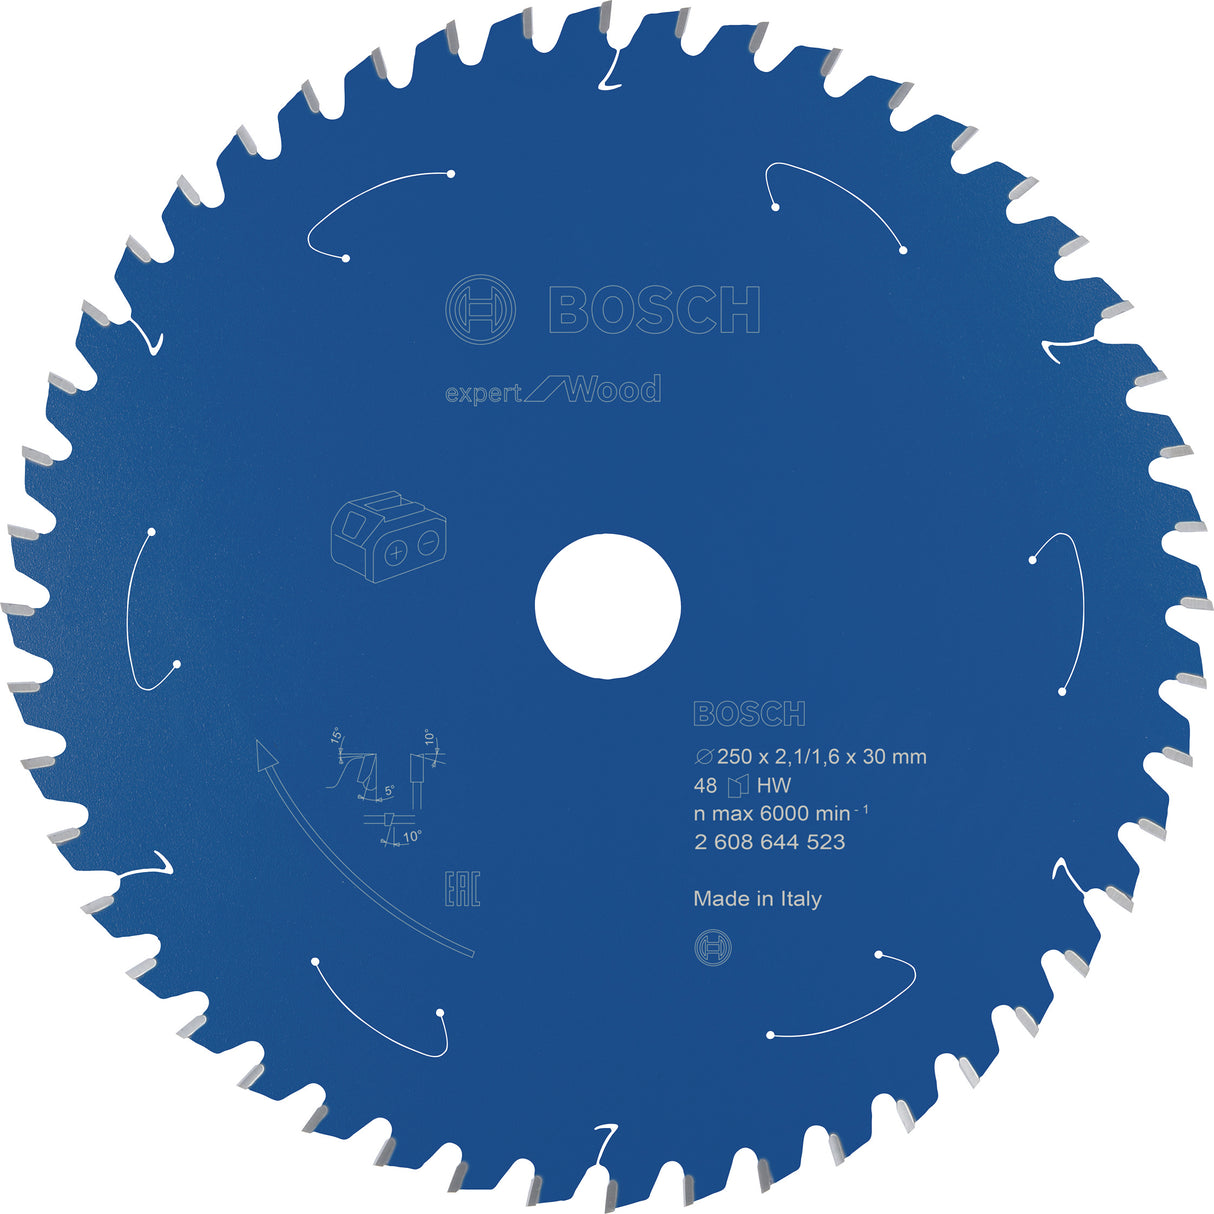 Bosch Professional Expert Circular Saw Blade for Wood - Cordless Saws - 250x2.1/1.6x30 T48